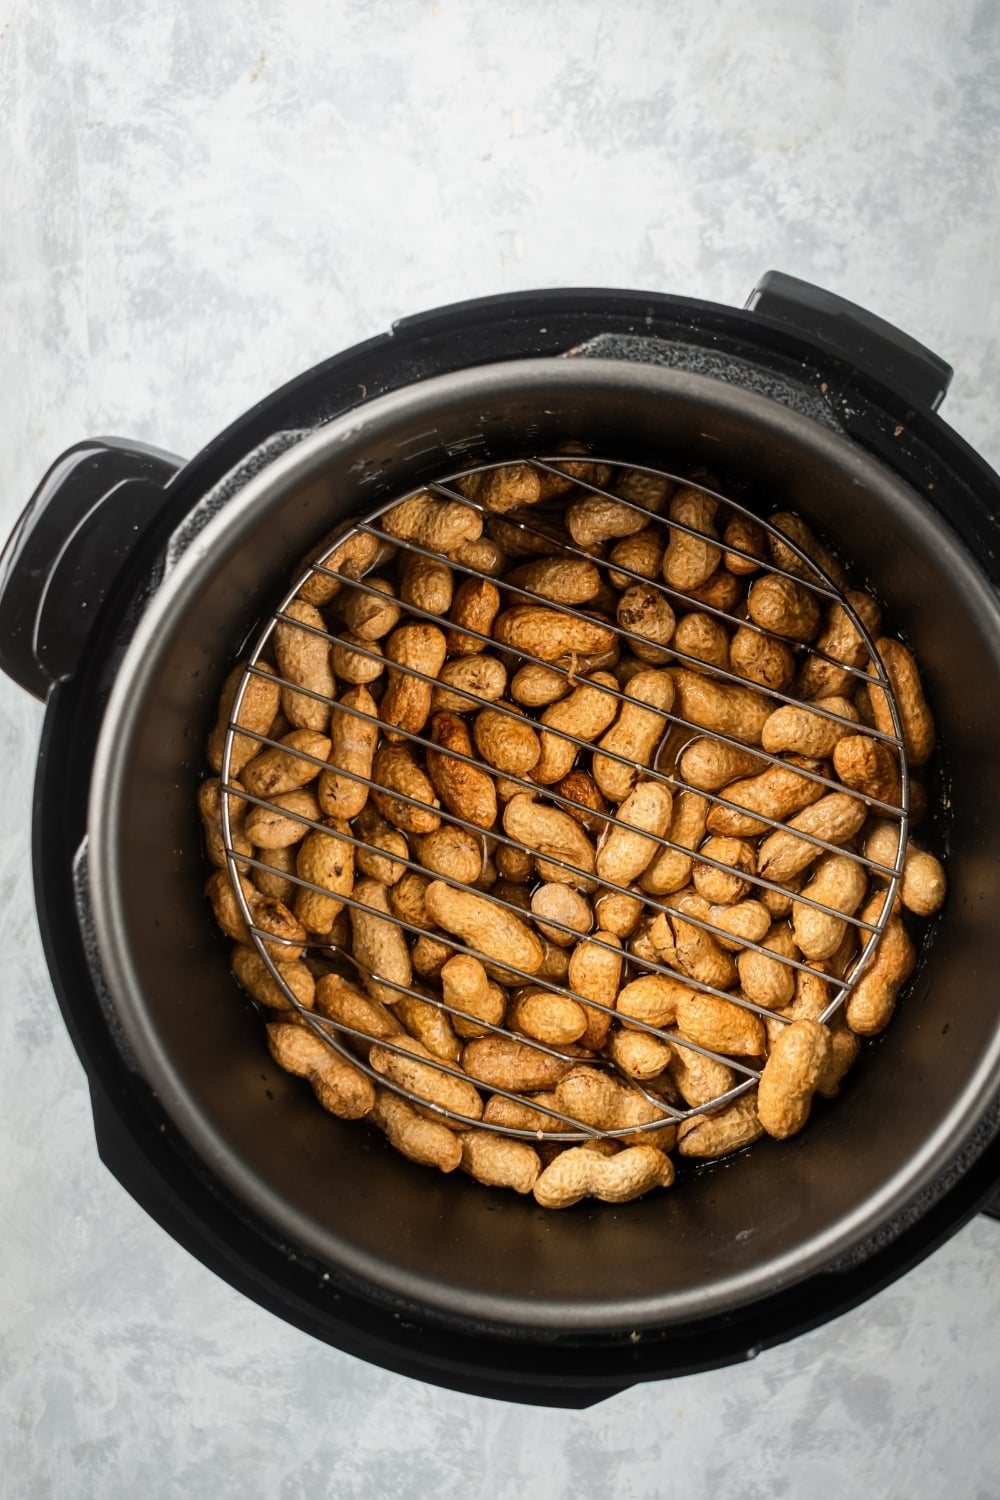 How To Boil Peanuts In Electric Pressure Cooker